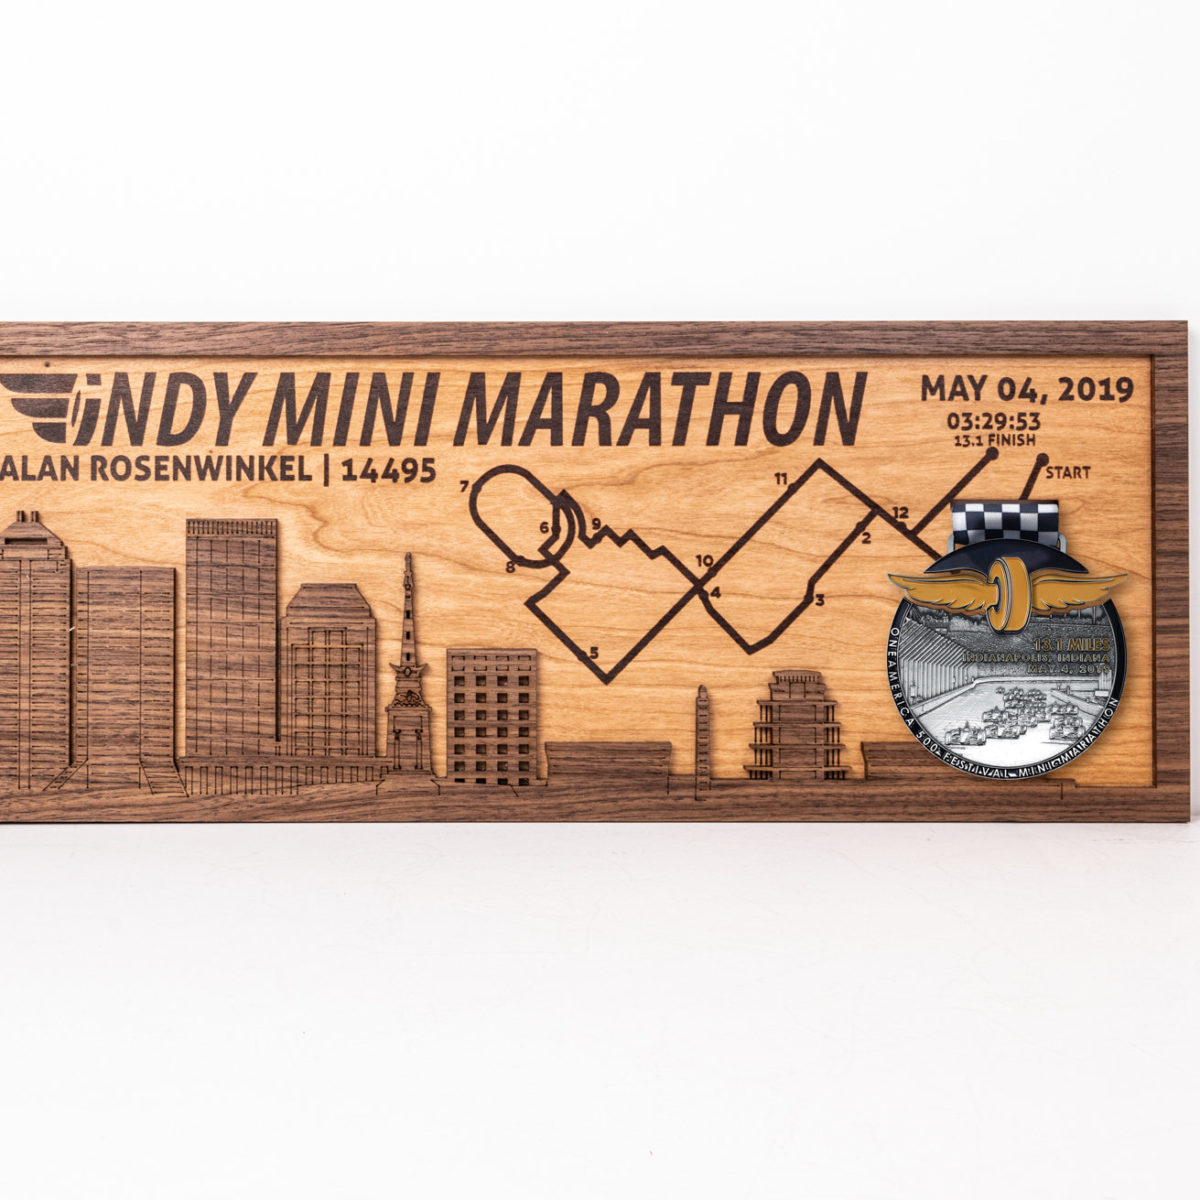 Indy Mini Marathon Medal Display Wooden Medal Holder Indianapolis Marathon  OneAmerica 500 Festival Marathon - Fathers's Day Running by TinkerMake